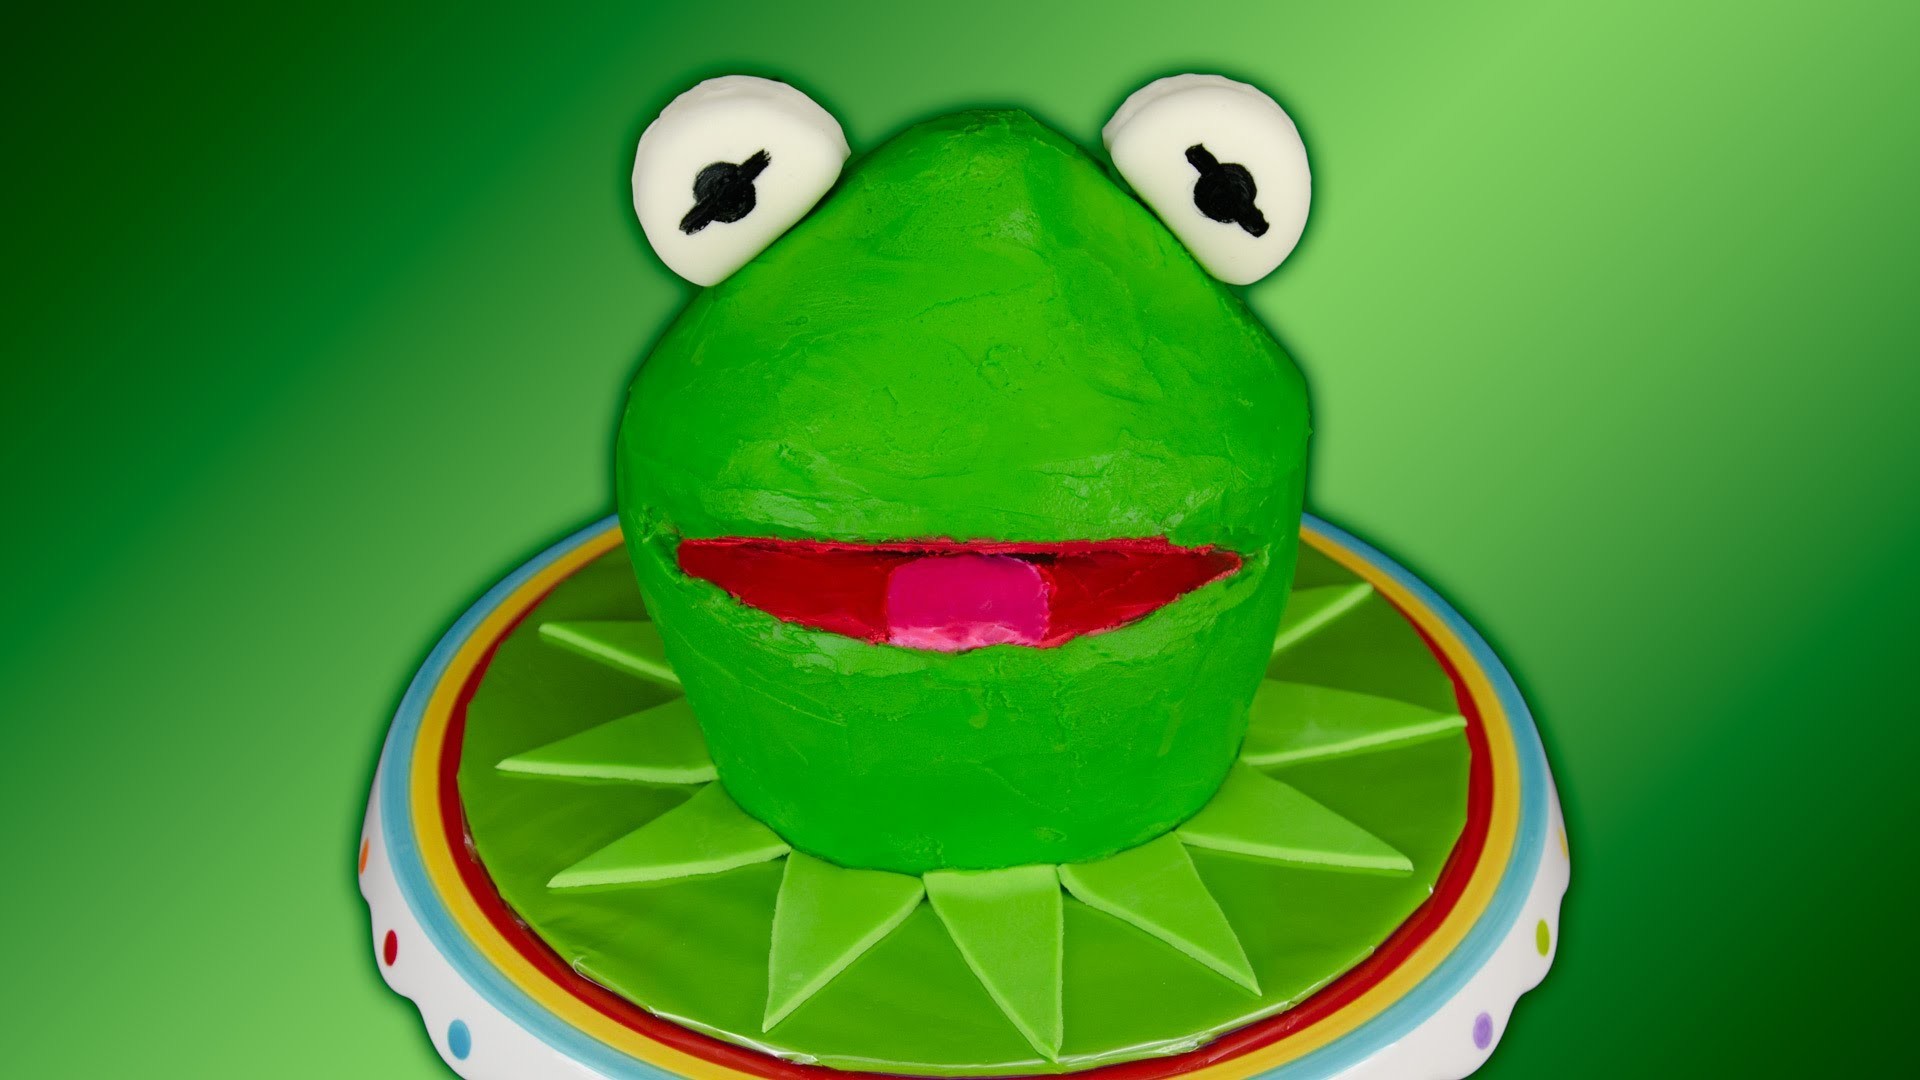 Kermit The Frog Cake / Muppets Cake Using Green Velvet - Kermit The Frog Cake Recipe - HD Wallpaper 